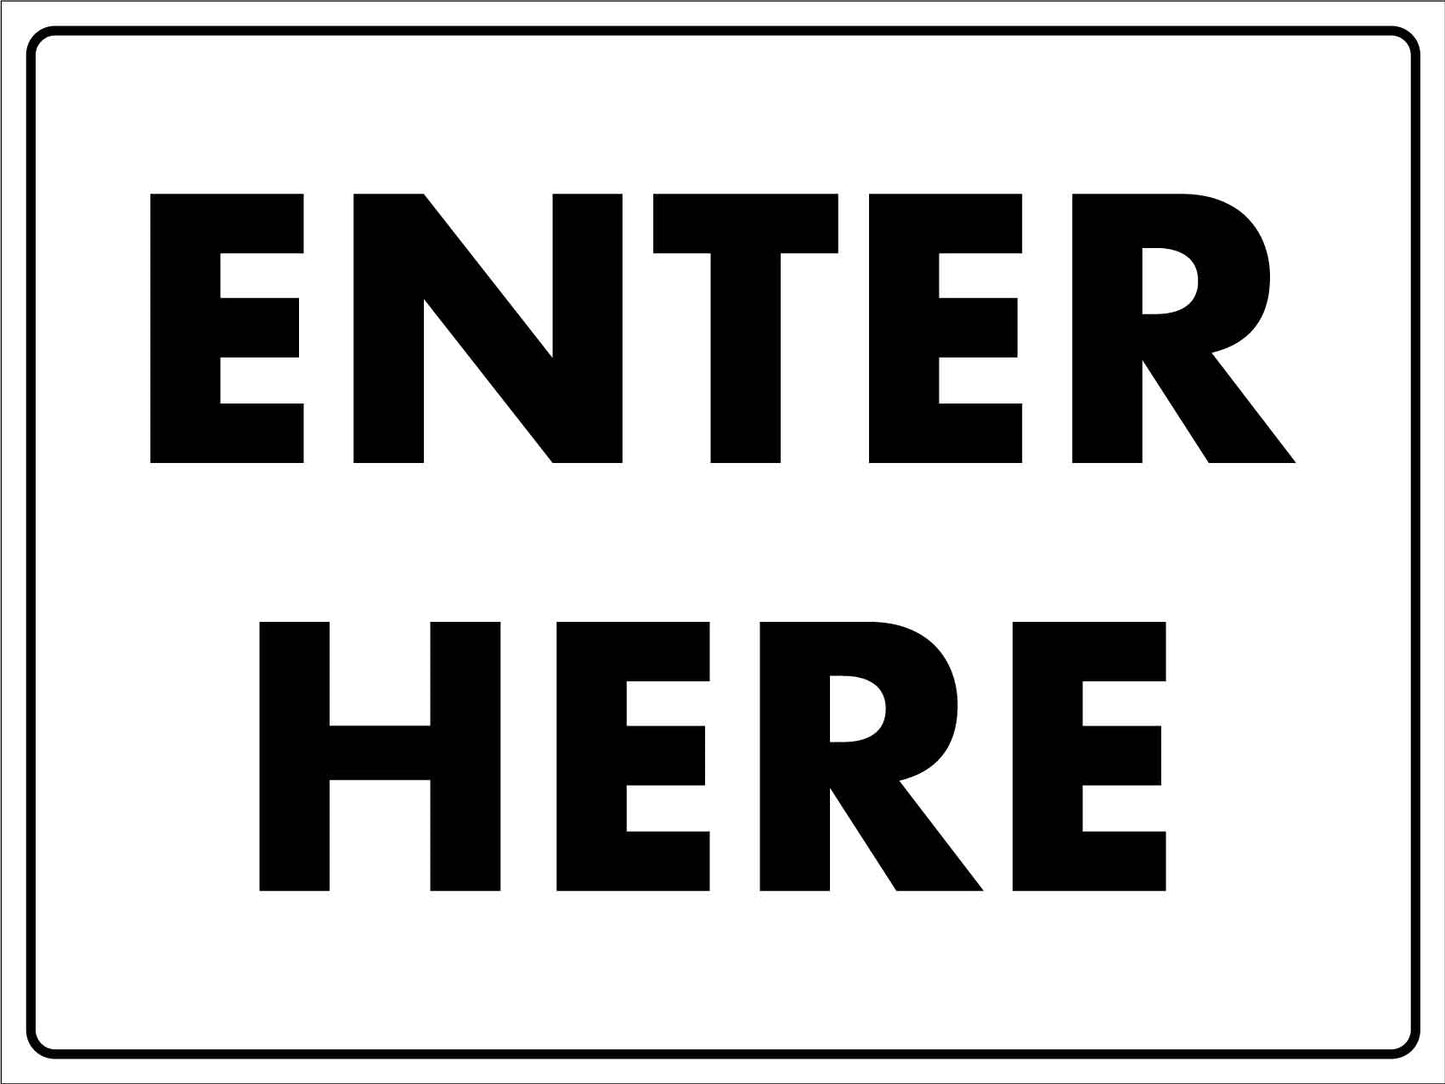 Enter Here Sign